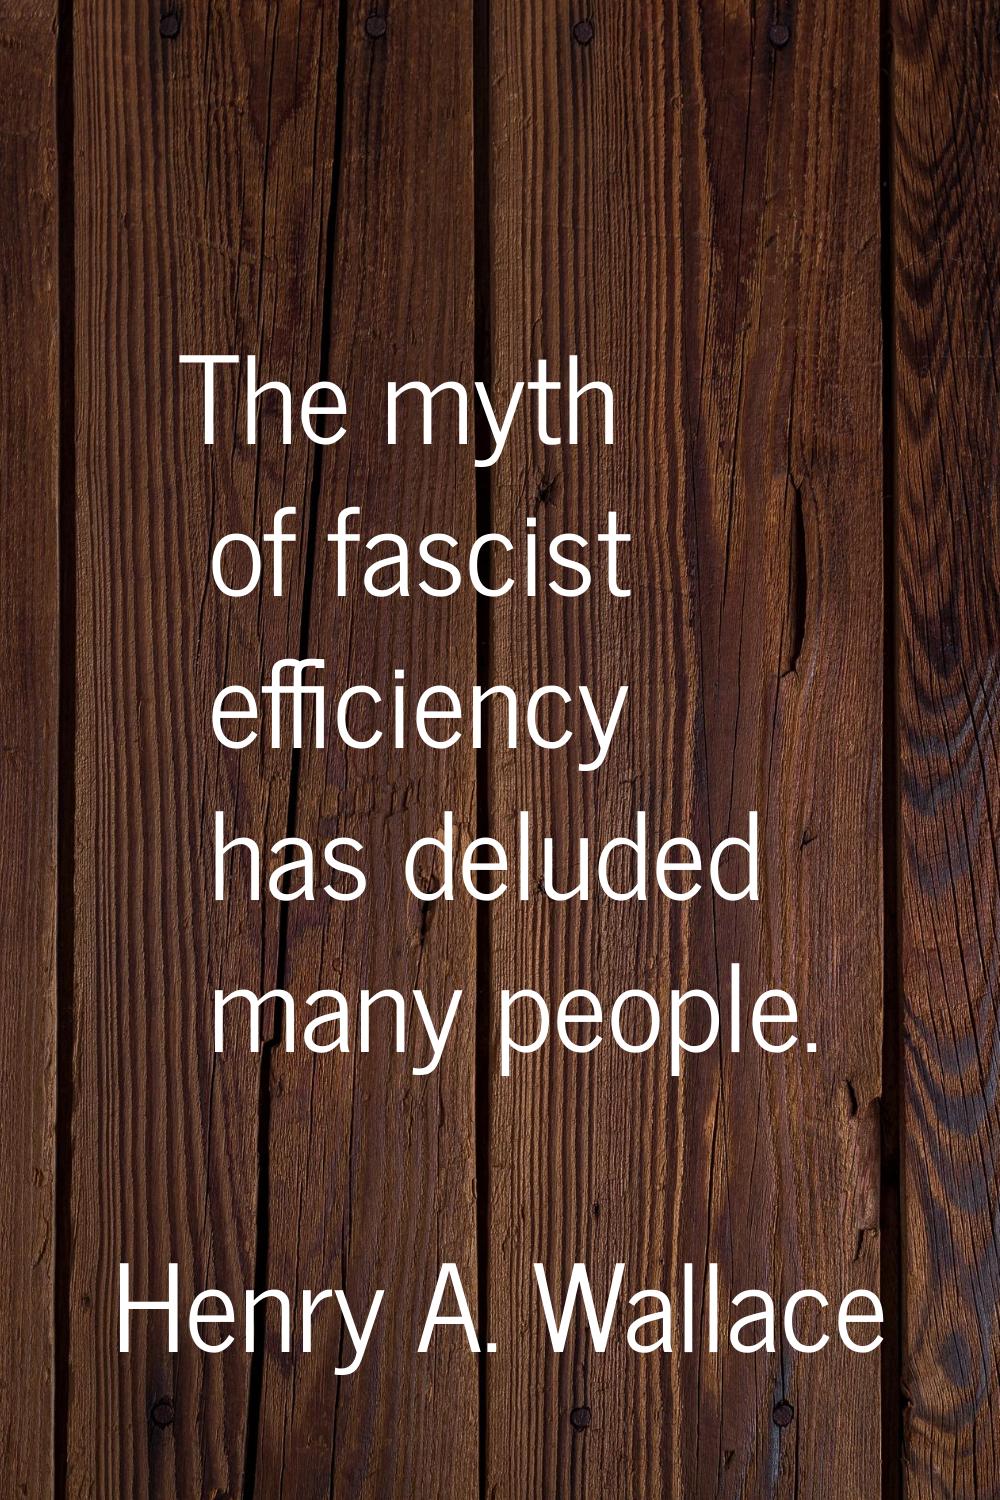 The myth of fascist efficiency has deluded many people.